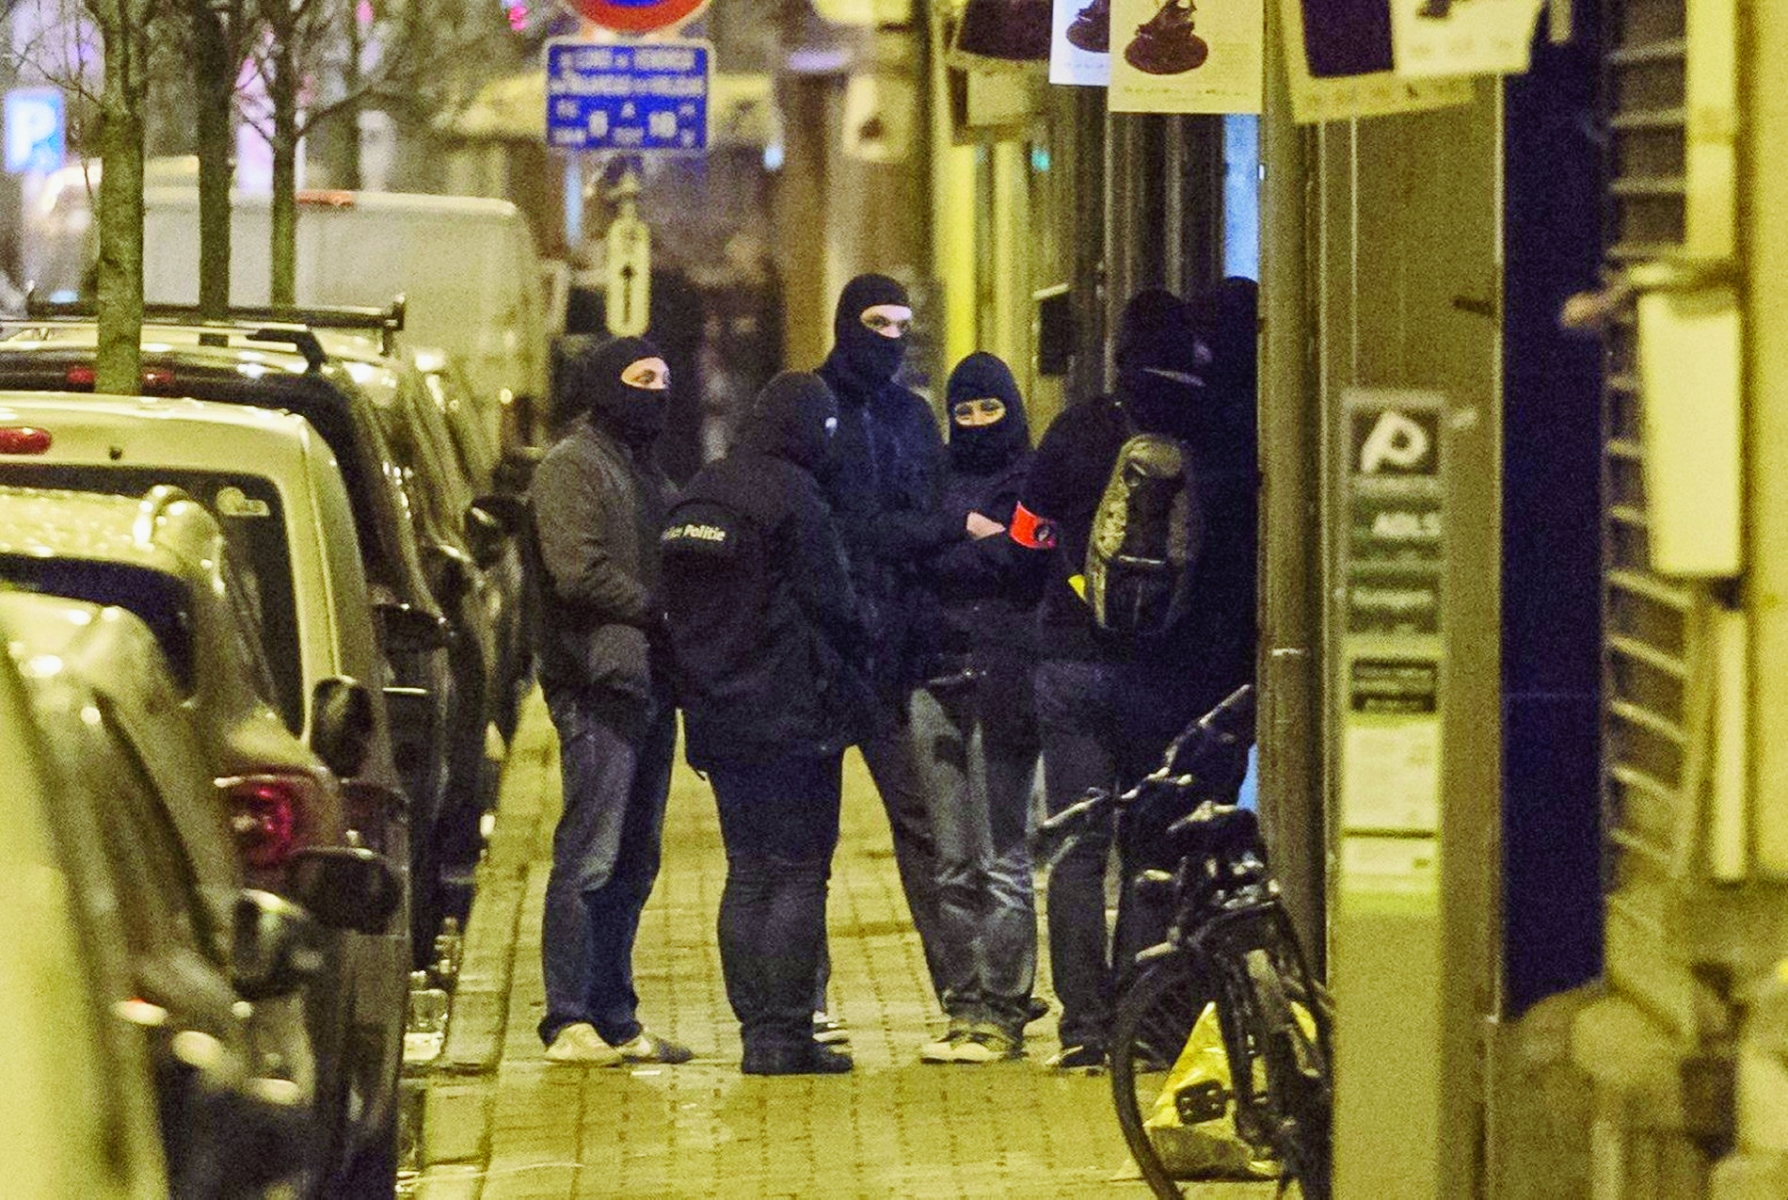 Police investigate an area where terror suspect Mohamed Abrini was arrested earlier today, in Brussels on Friday April 8, 2016. The federal prosecutor's office confirmed a fugitive suspect in the Nov. 13 Paris attacks was arrested in Belgium on Friday, after a raid Belgian authorities said was linked to the deadly March 22 Brussels bombings. The suspect, Mohamed Abrini, is believed to be the mysterious "man in the hat" who escaped the double bombing at Brussels airport, but further investigation is needed to determine Abrini is the third suspect of the airport attack. (AP Photo/Geert Vanden Wijngaert) Belgium Attacks